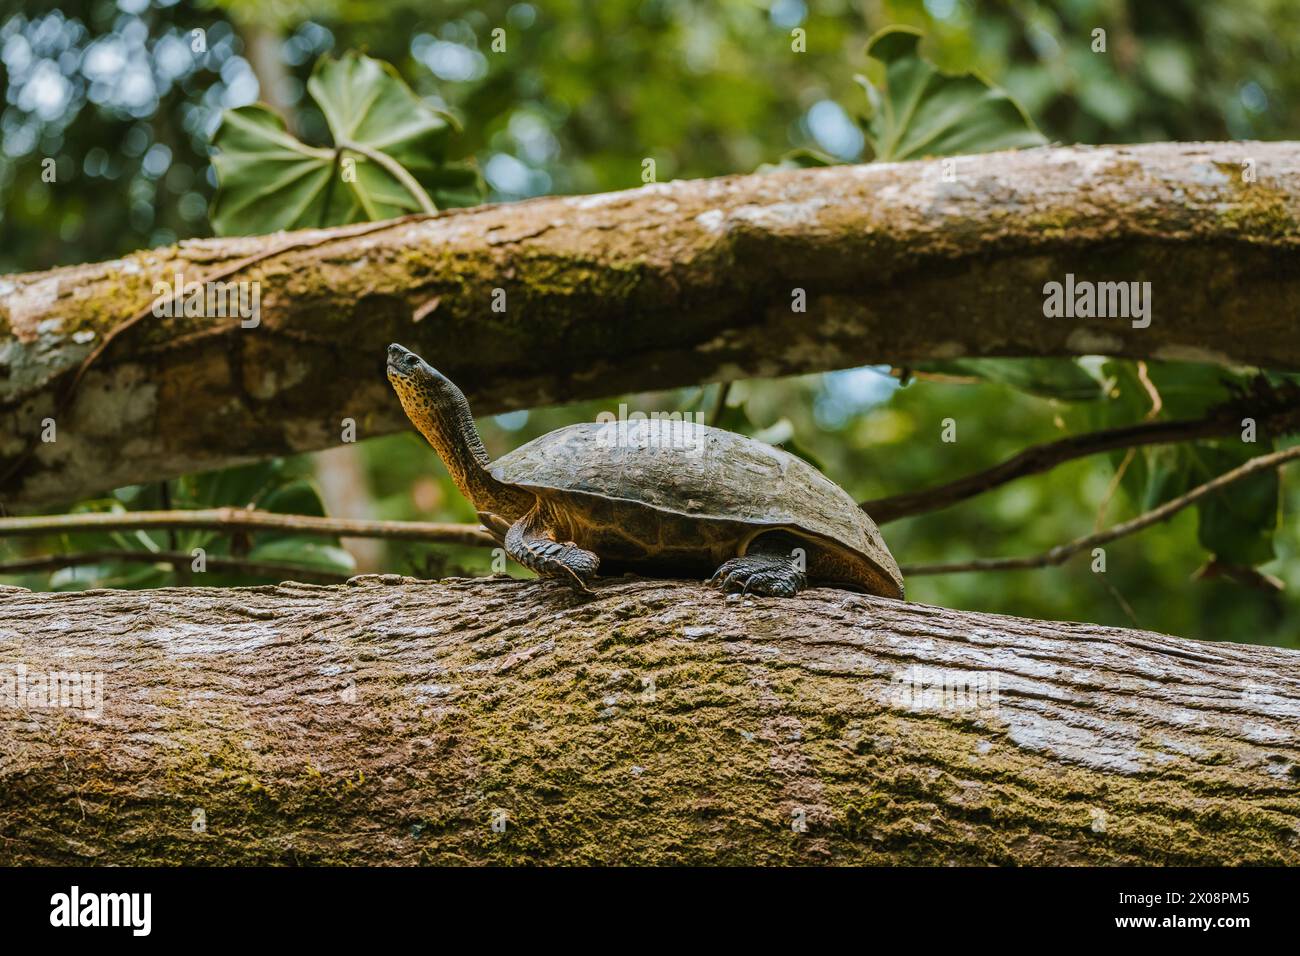 Central American river turtle Dermatemys mawii basking on a moss-covered tree trunk in the Costa Rican rainforest. Stock Photo